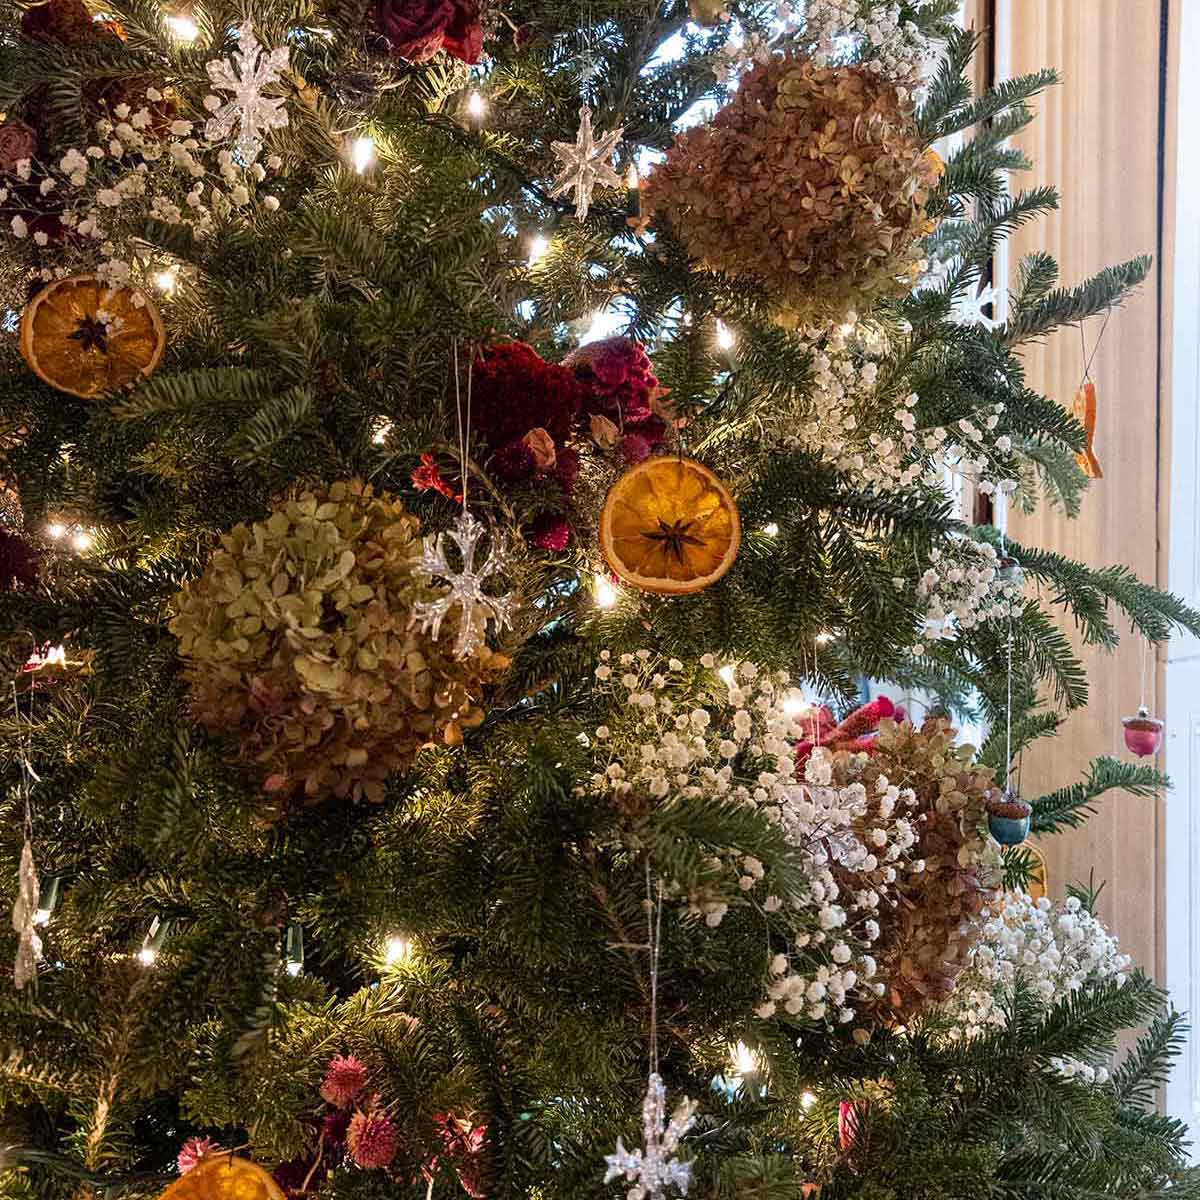 A Christmas tree, decorated with flowers, orange slices and lights.